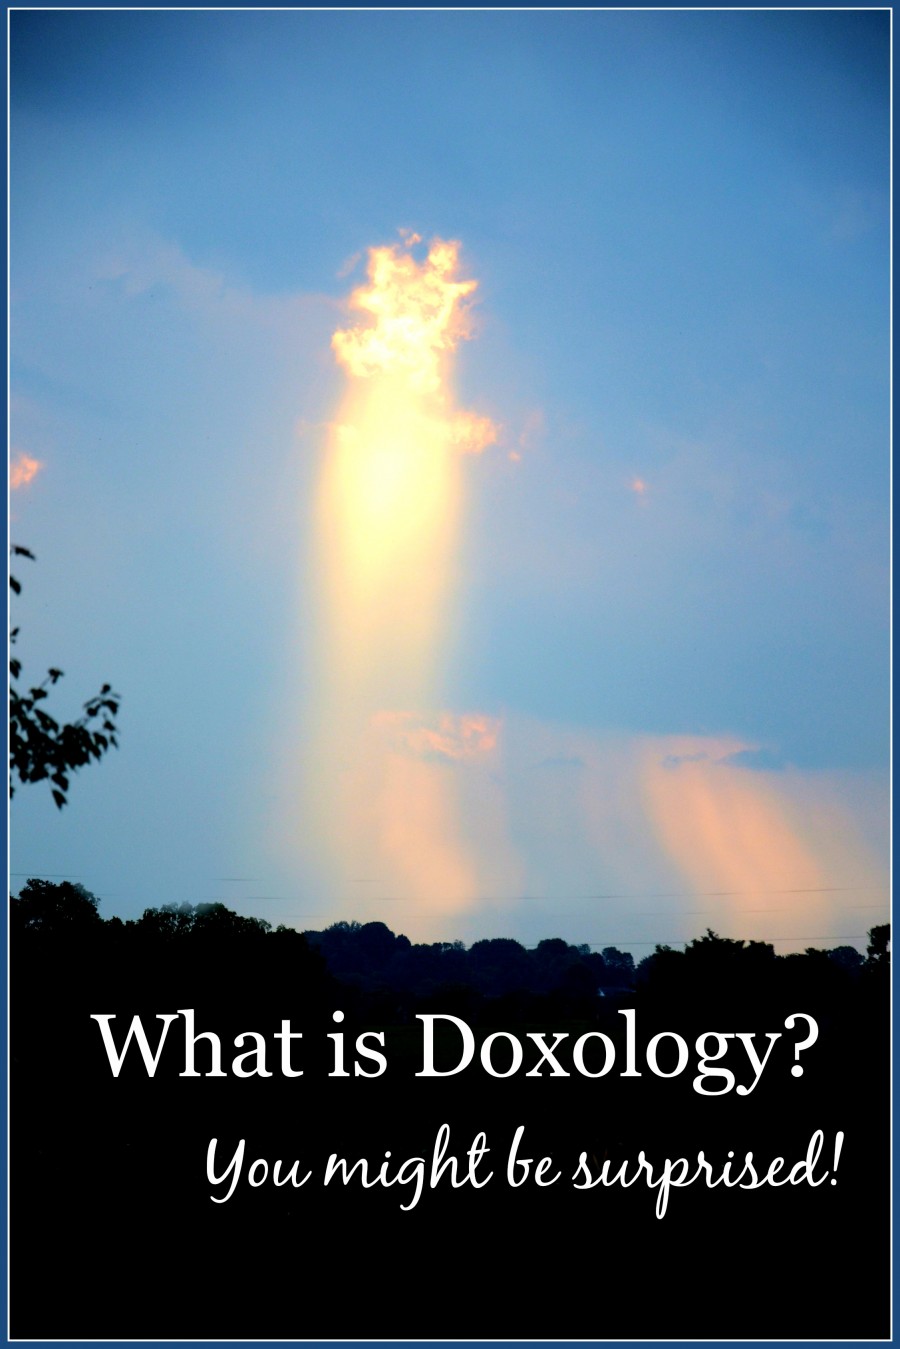 WHAT IS DOXOLOGY? YOU WILL BE SO SURPRISED!